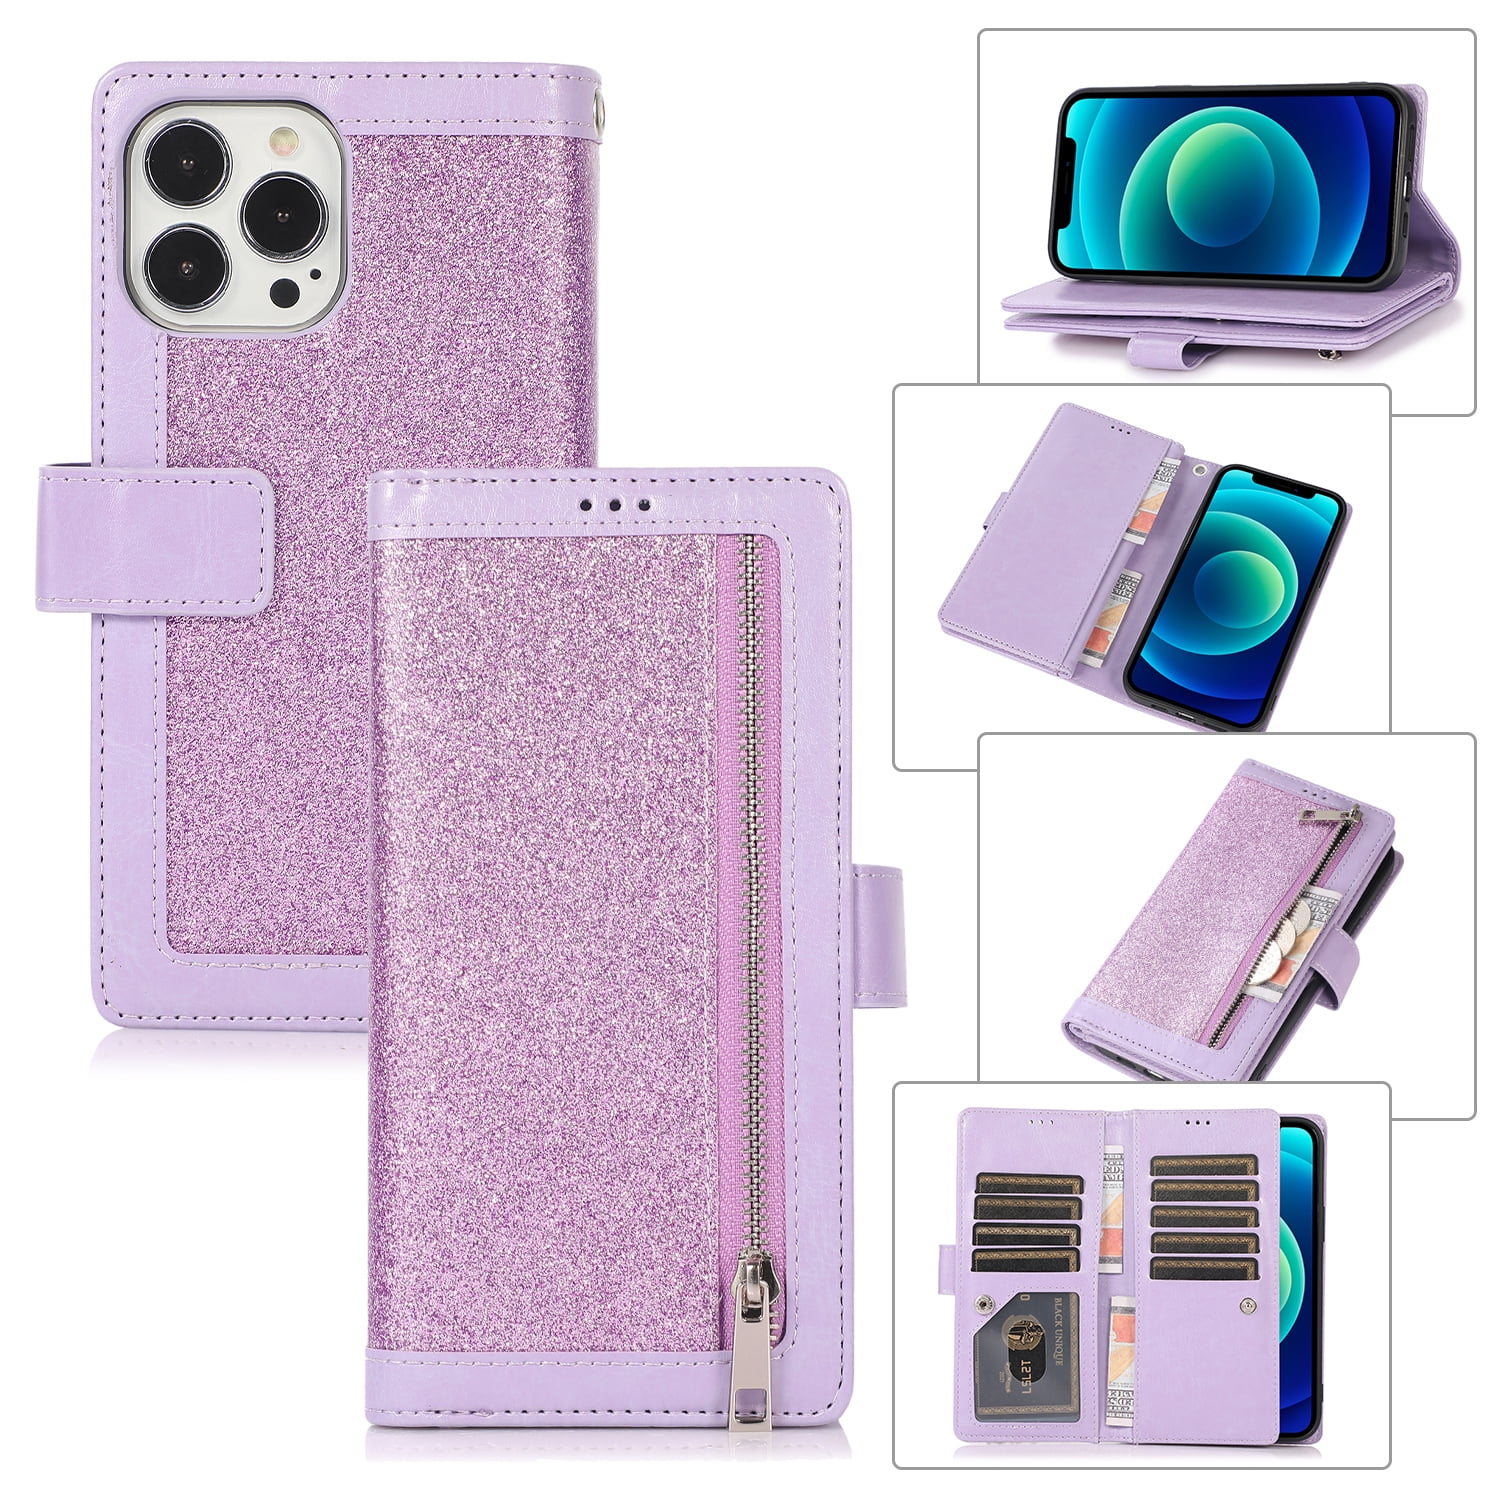 for iPhone 13 Mini PRO Max Bling Case Luxury Square Bling Diamond Glitter  Soft Trunk Cover with Finger Ring Grip Kickstand Phone Skin Purple Case  Holder - China iPhone 5 5s Se